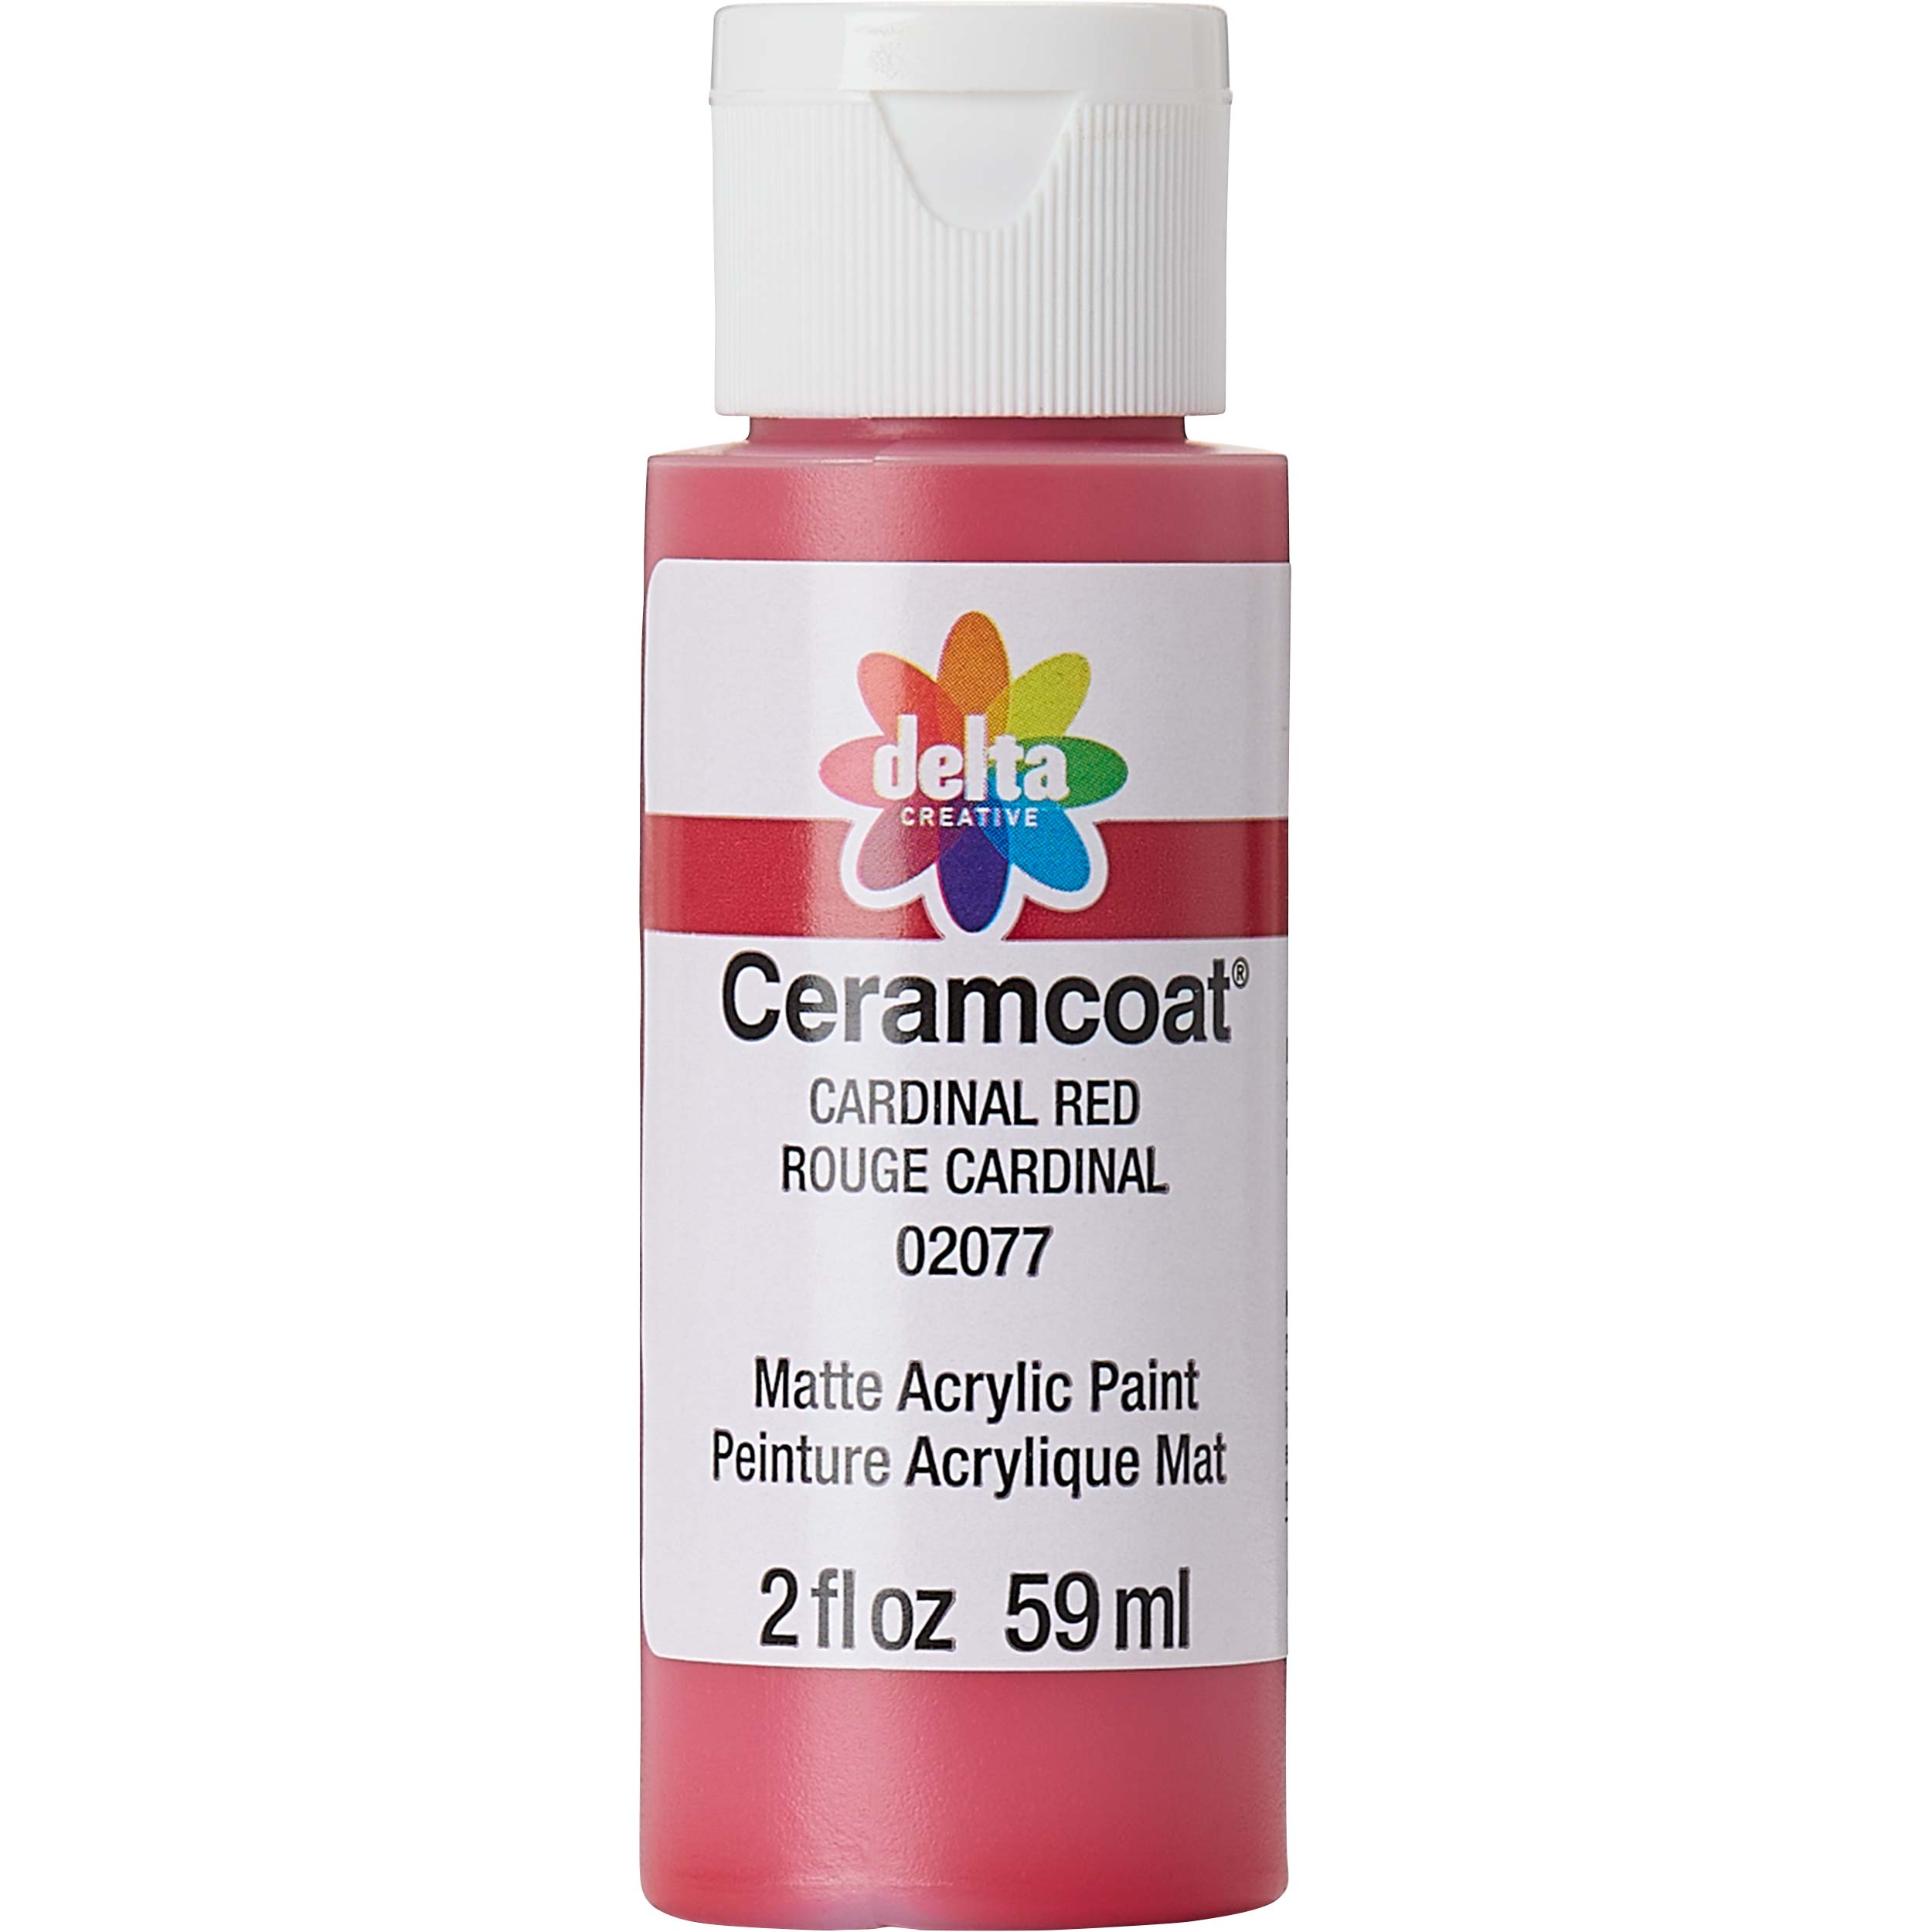 Delta Ceramcoat Acrylic Paint - Cardinal Red, 2 oz. - 020770202W